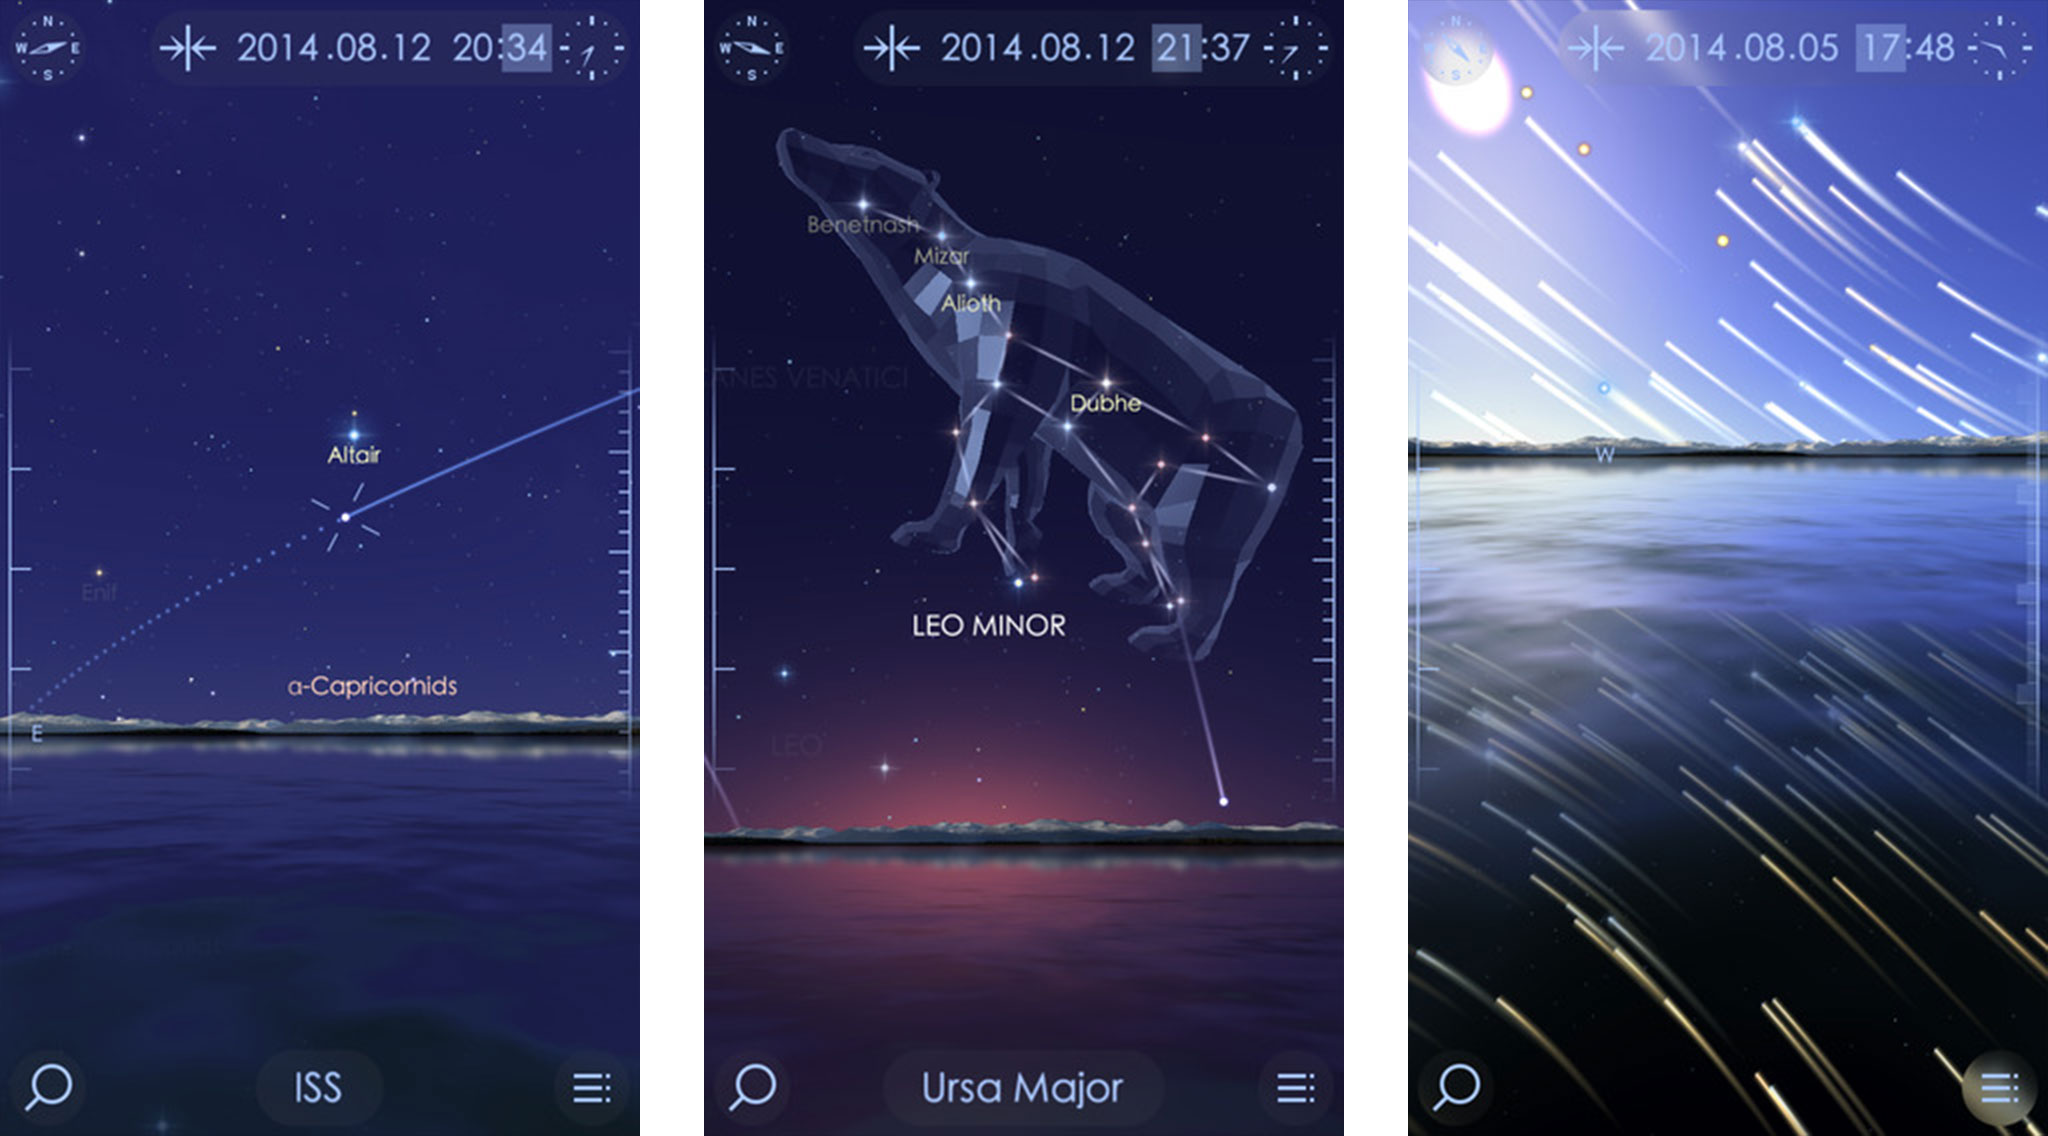 Best astronomy apps for iPhone: Star Walk 2